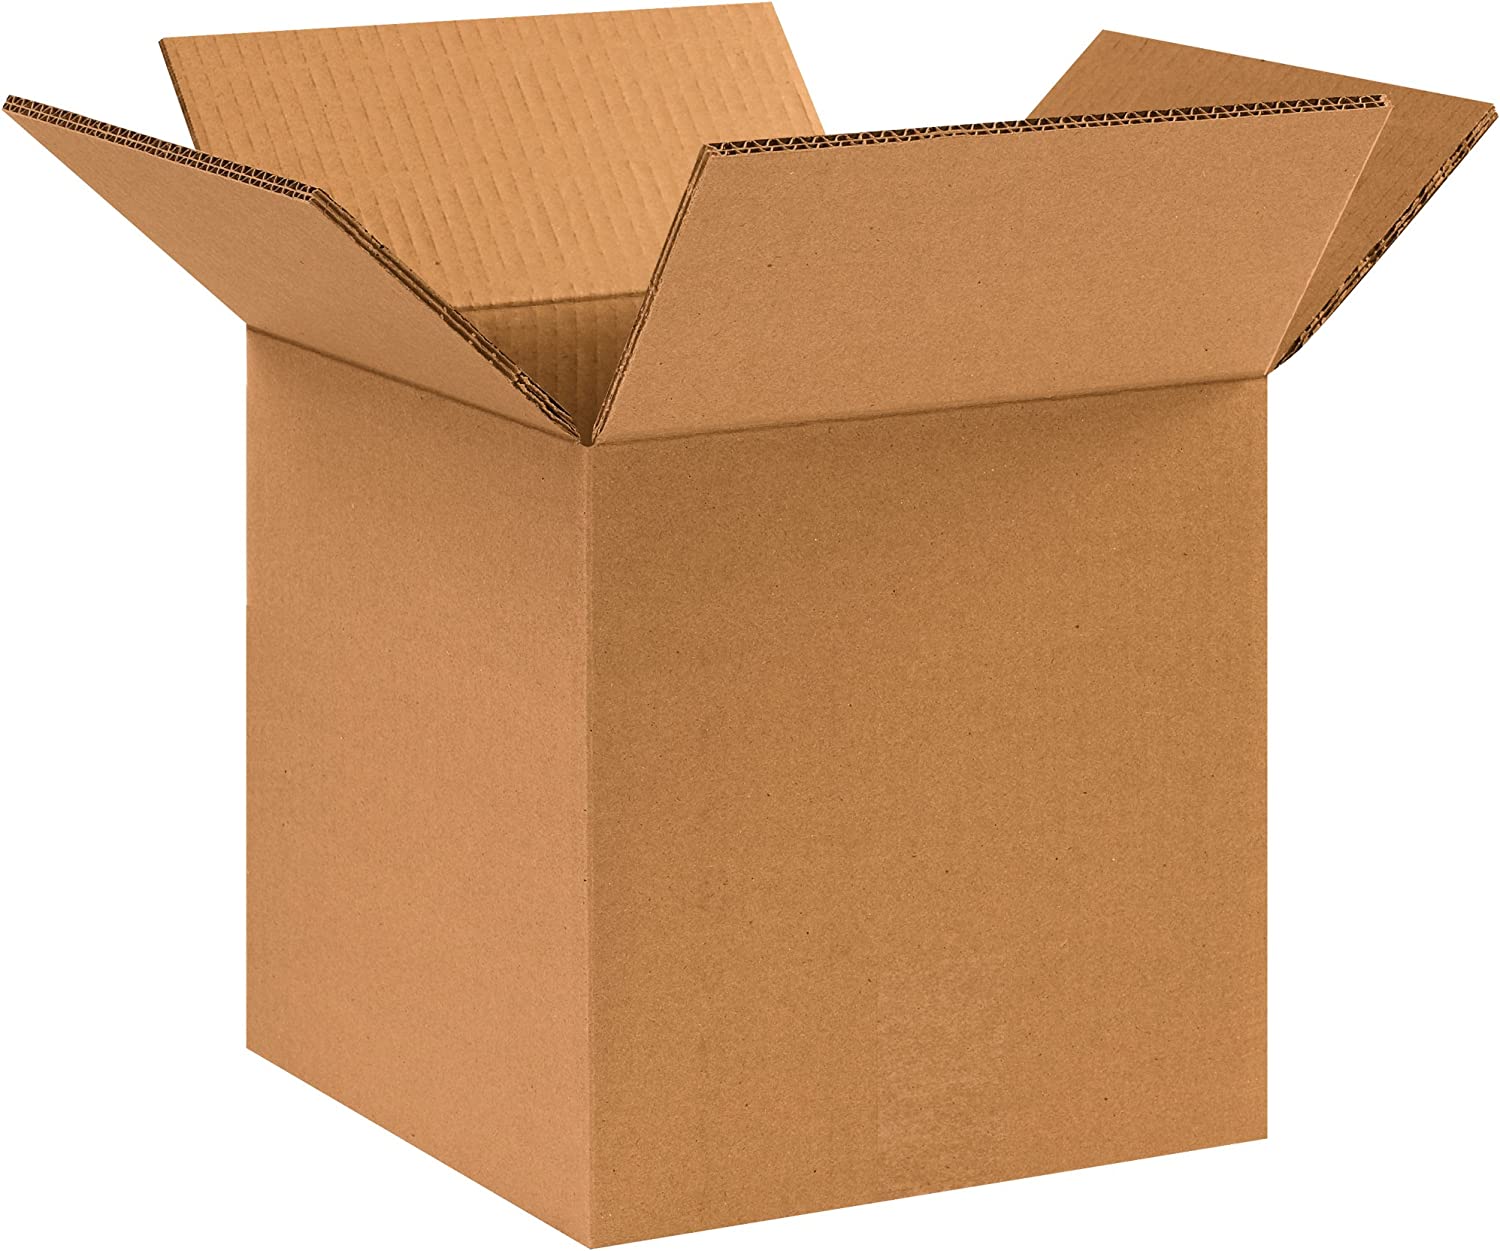 Boxes Fast Double Wall Corrugated Heavy-Duty Cardboard Boxes